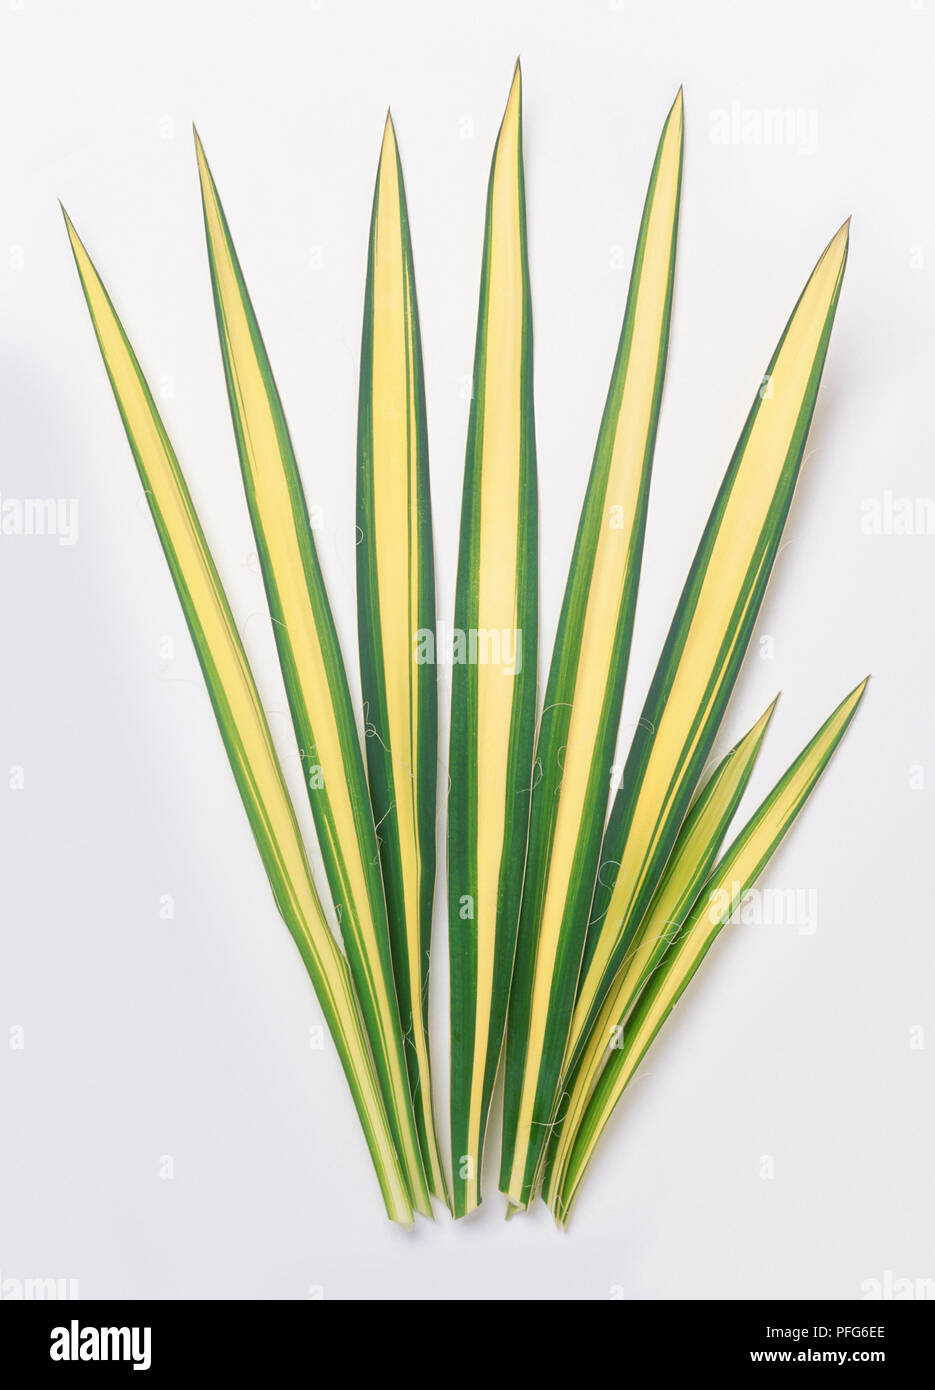 Pointed, yellow and green leaves from Yucca flaccida 'Golden Sword'  (Flaccid leaf yucca) Stock Photo